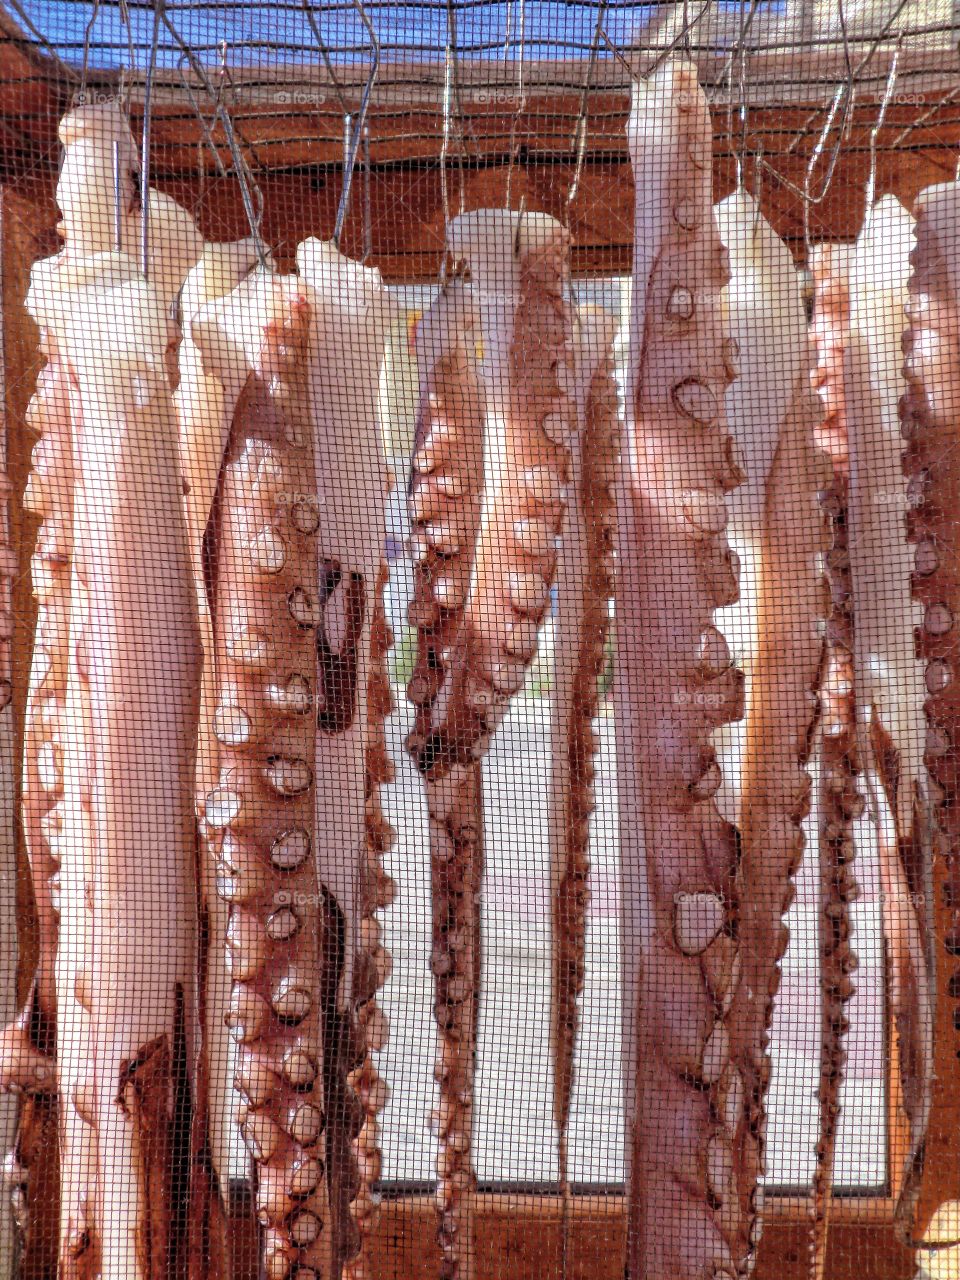 Octupus in a drying cage